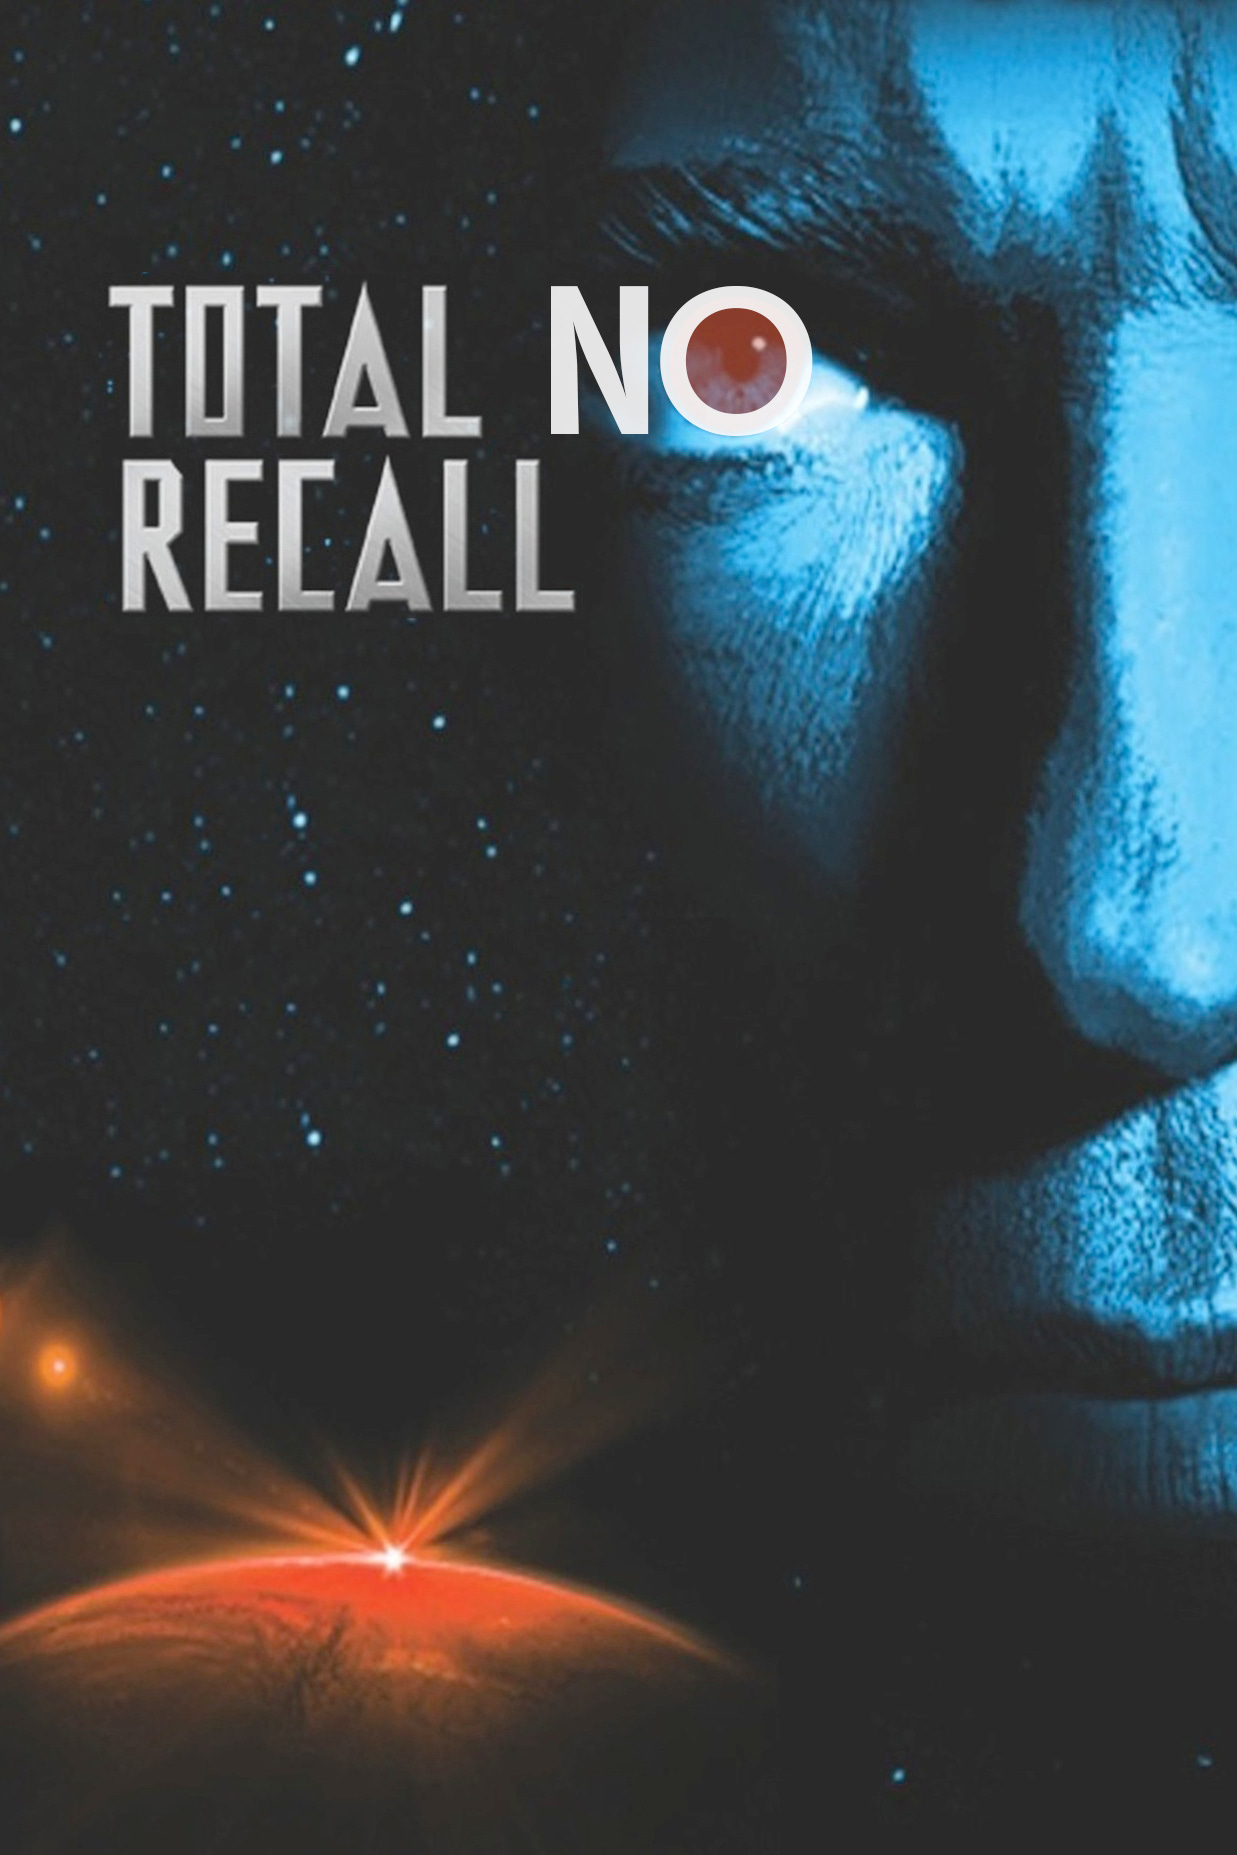 Scary Total No Recall poster